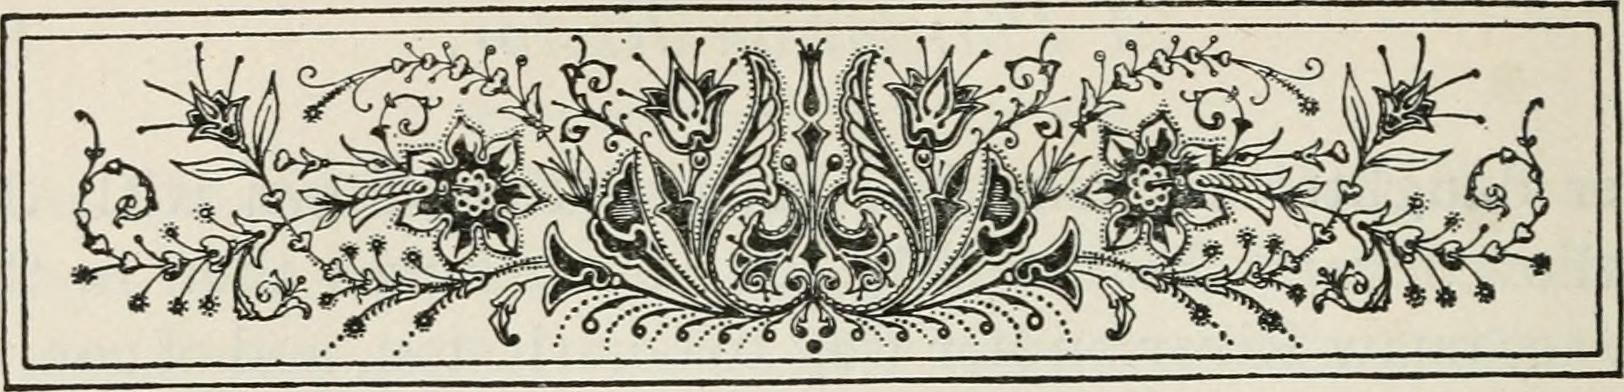 Image from page 115 of "Led on! Step by step, scenes from clerical, military, educational, and plantation life in the South, 1828-1898;" (1898)